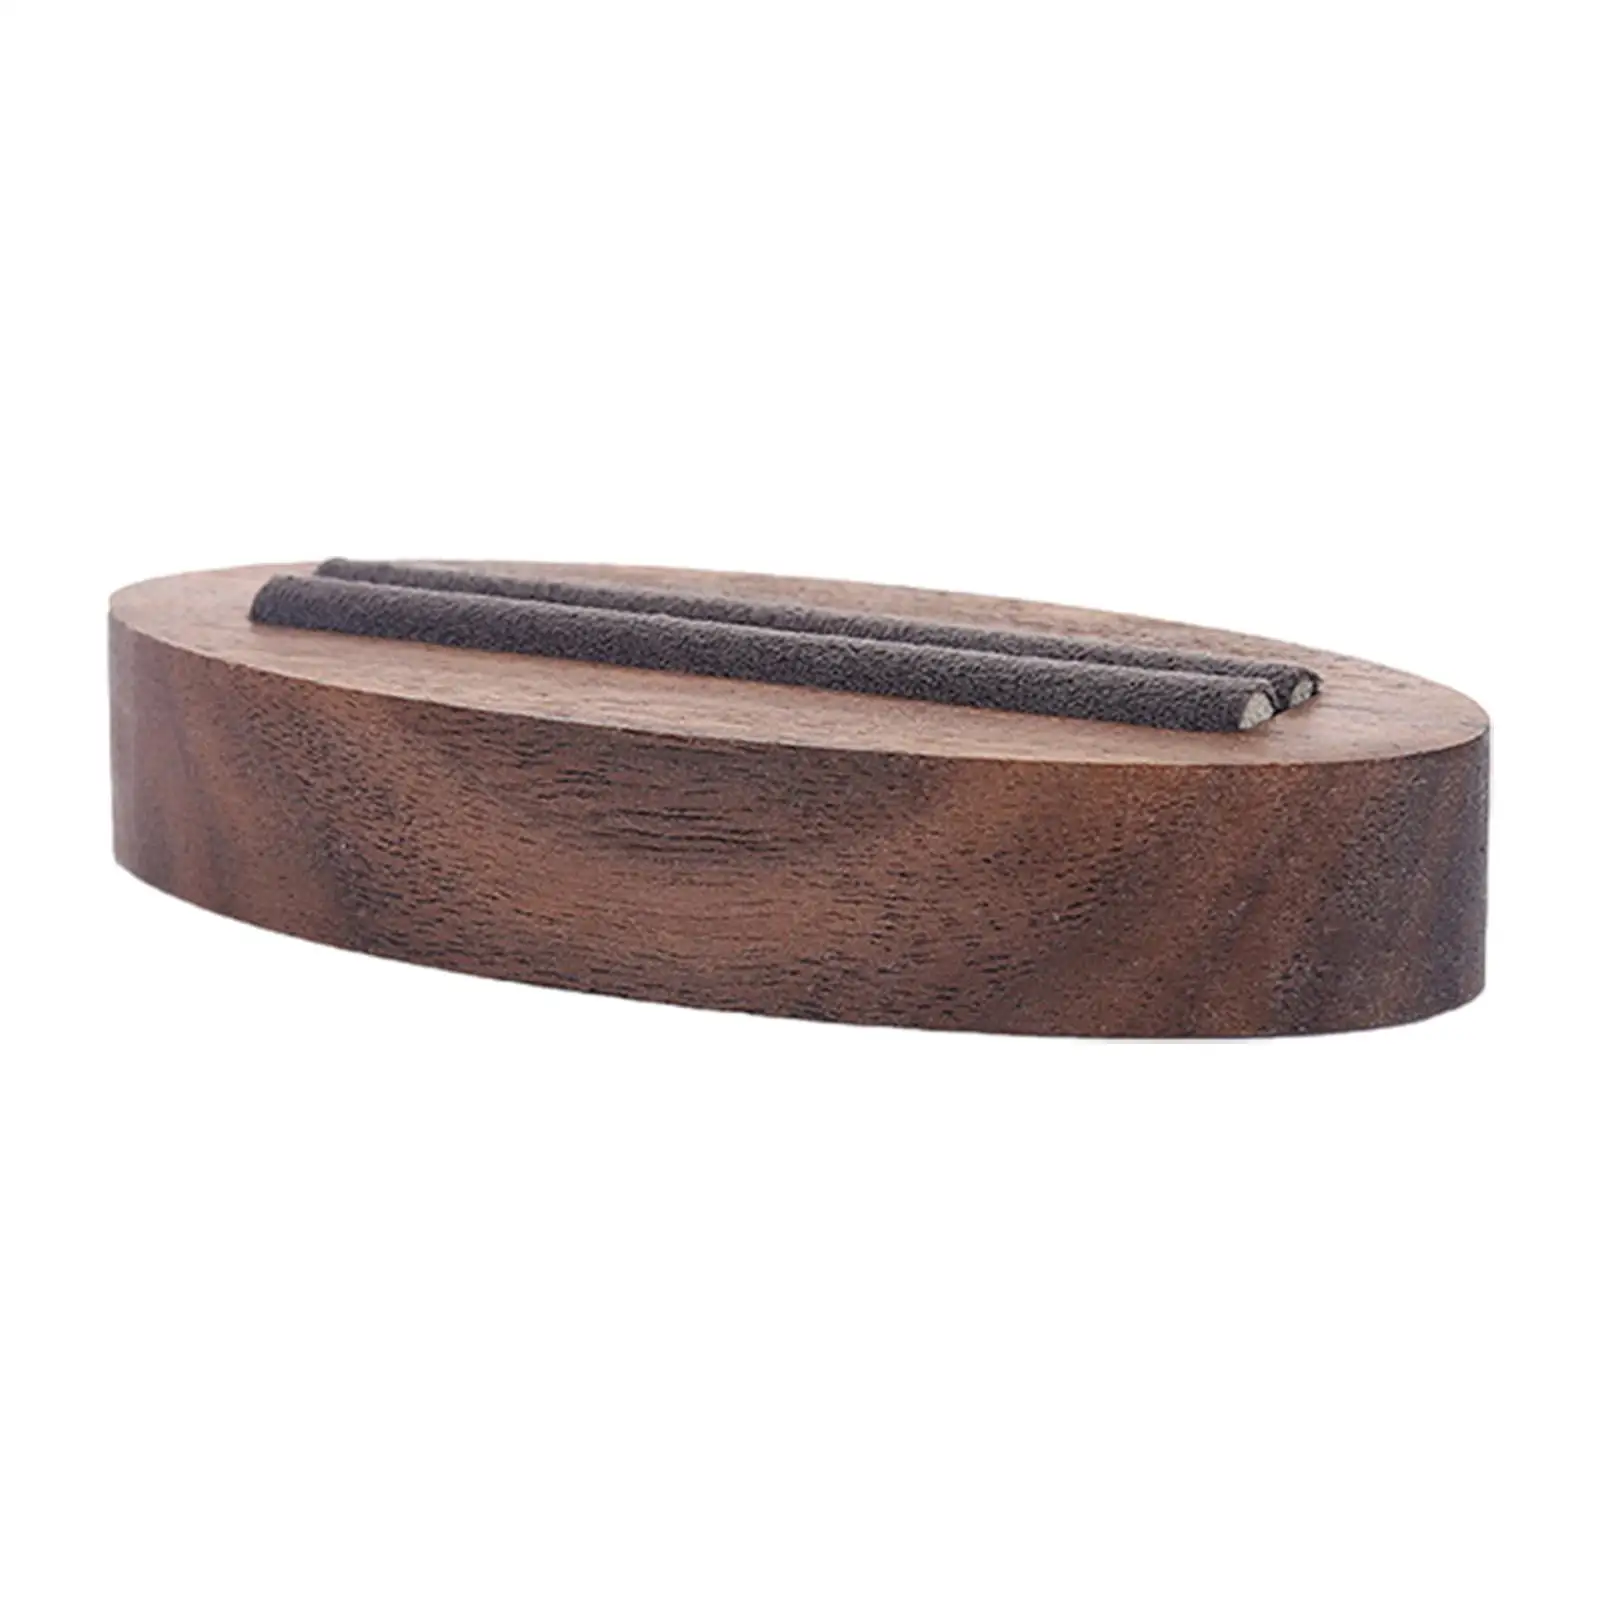 Wooden Ring Display Stand Jewelry Display Tray Oval Jewelry Holder for Shop Showcase Home Decoration